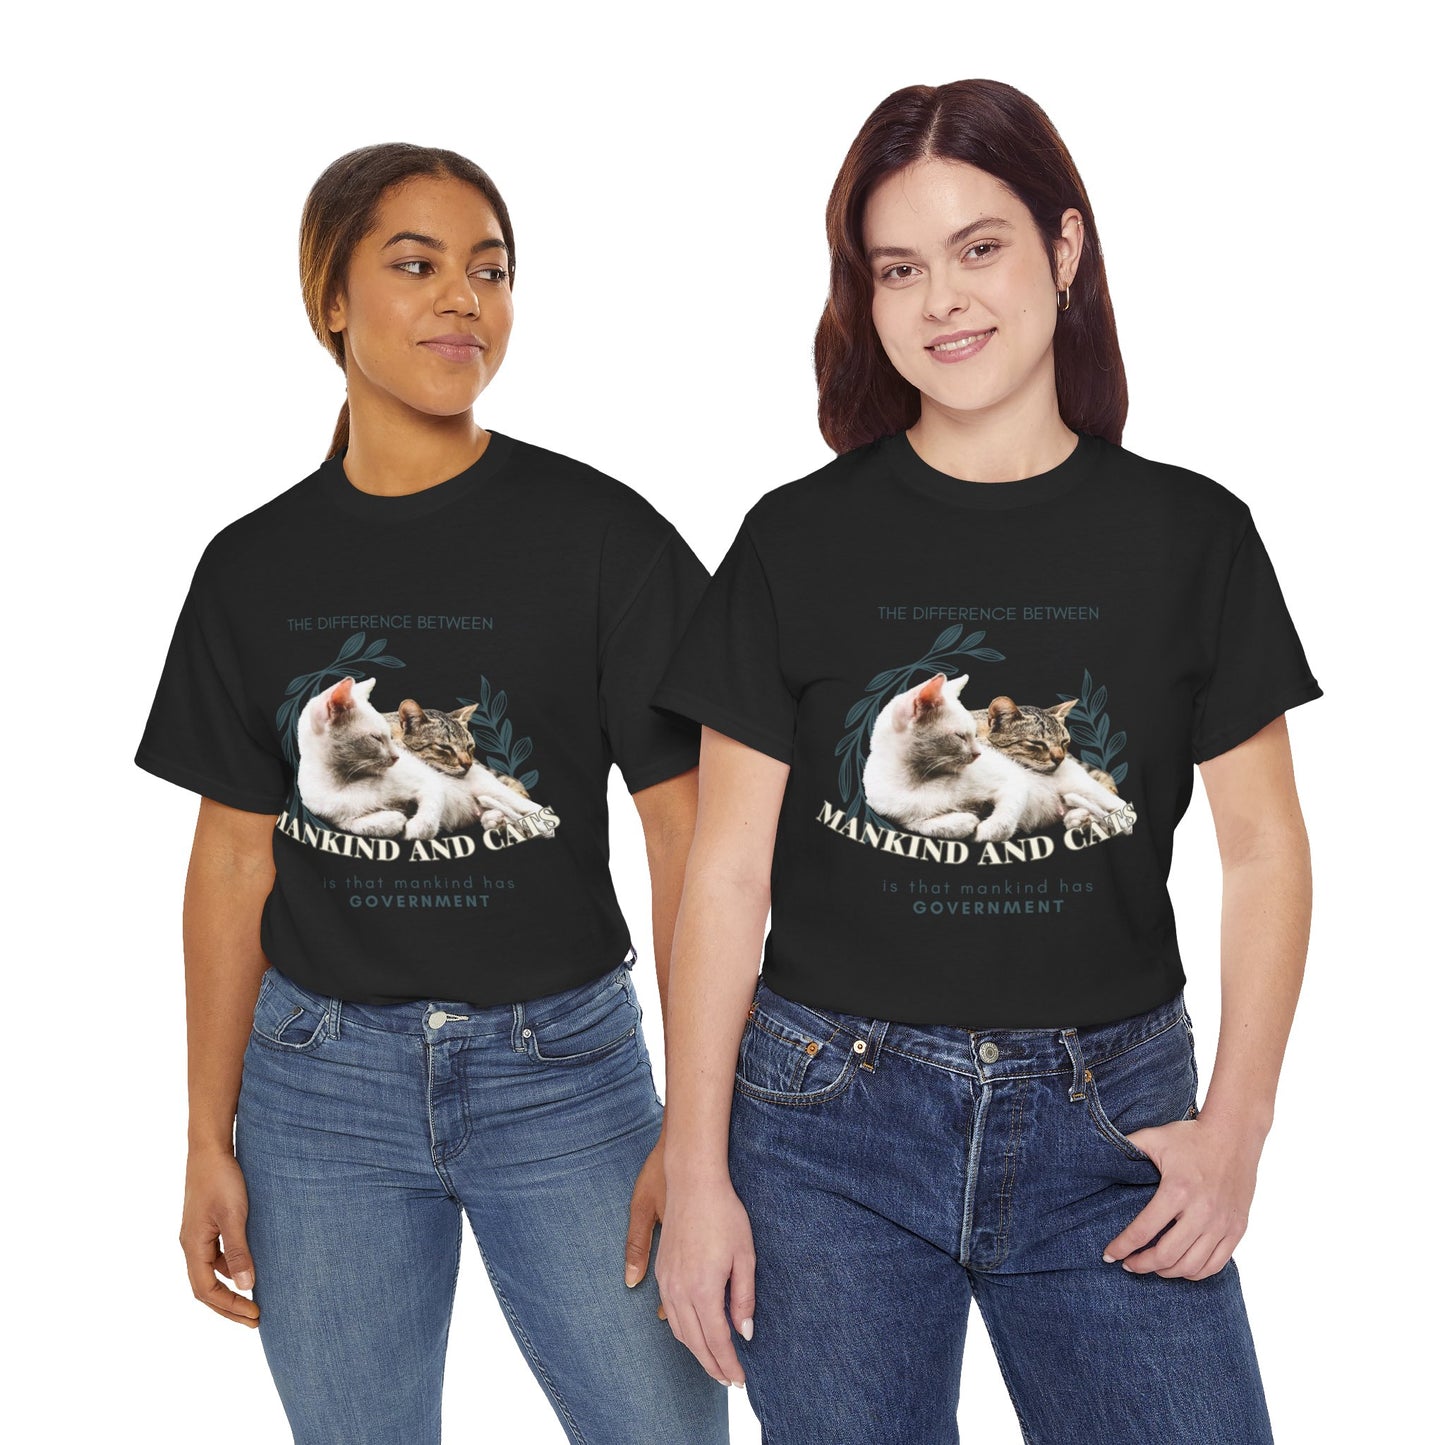 The Feline Free T-Shirt: No Government Needed"Mankind has government" 🐾🏛️